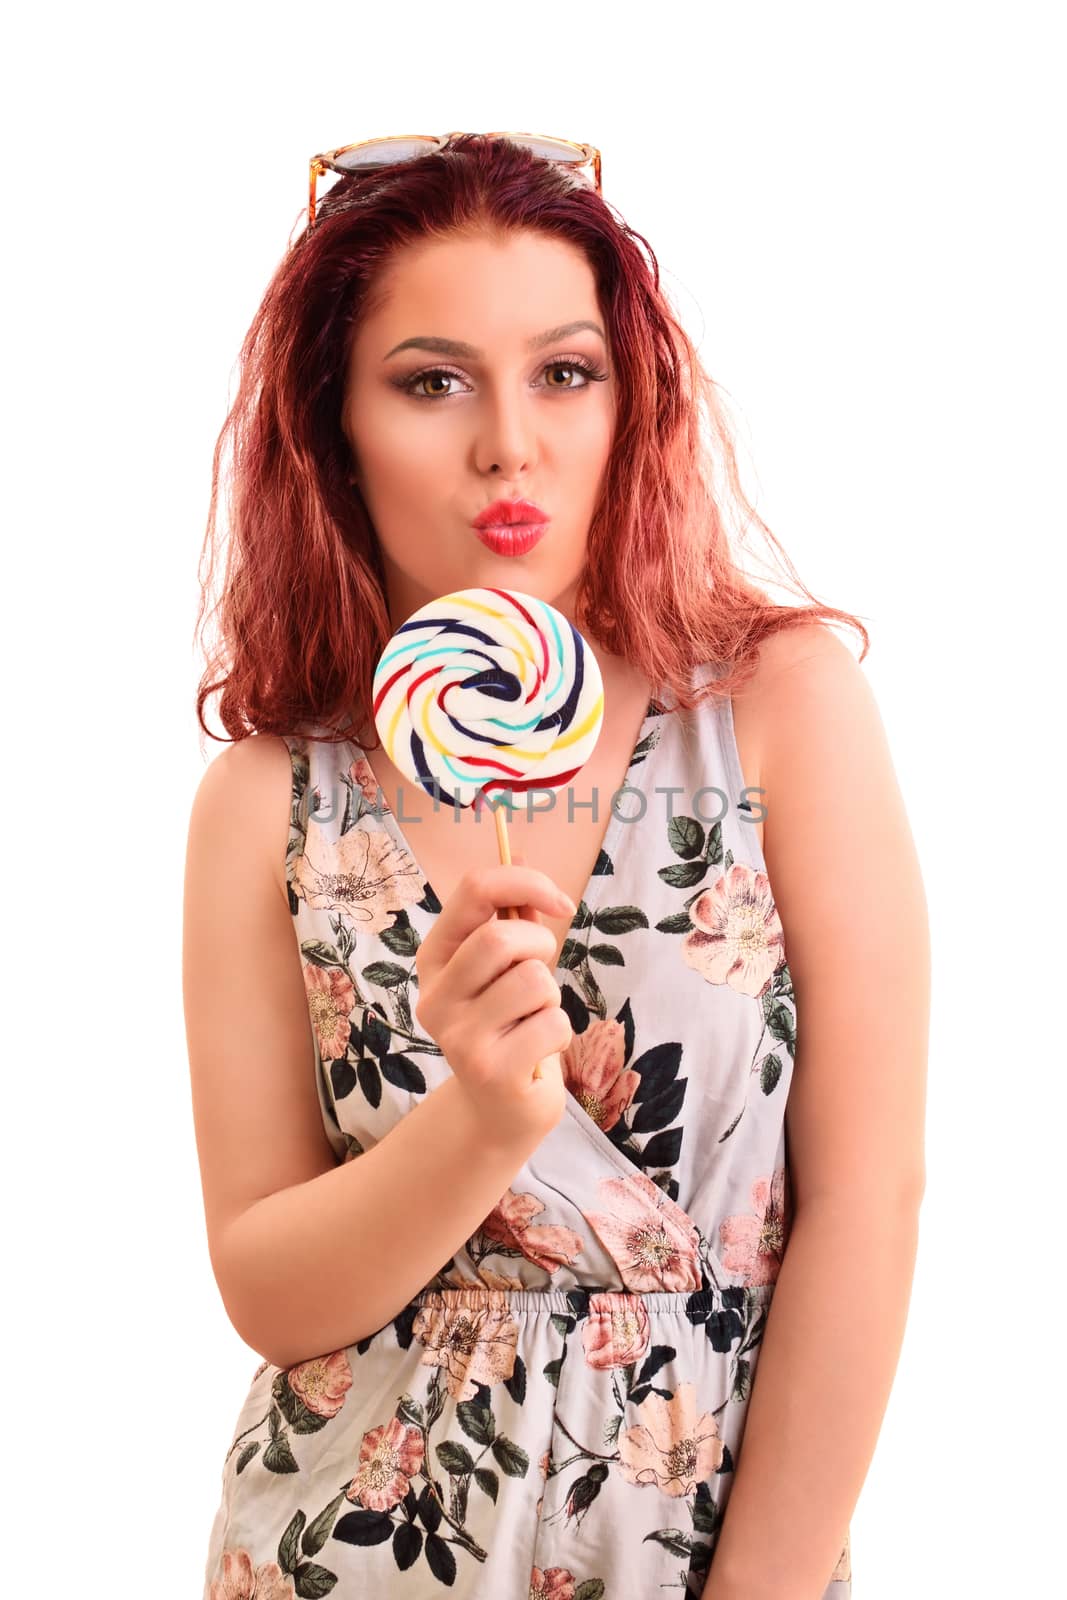 Portrait of a beautiful young girl holding a lollipop, sending a kiss, isolated on white background.